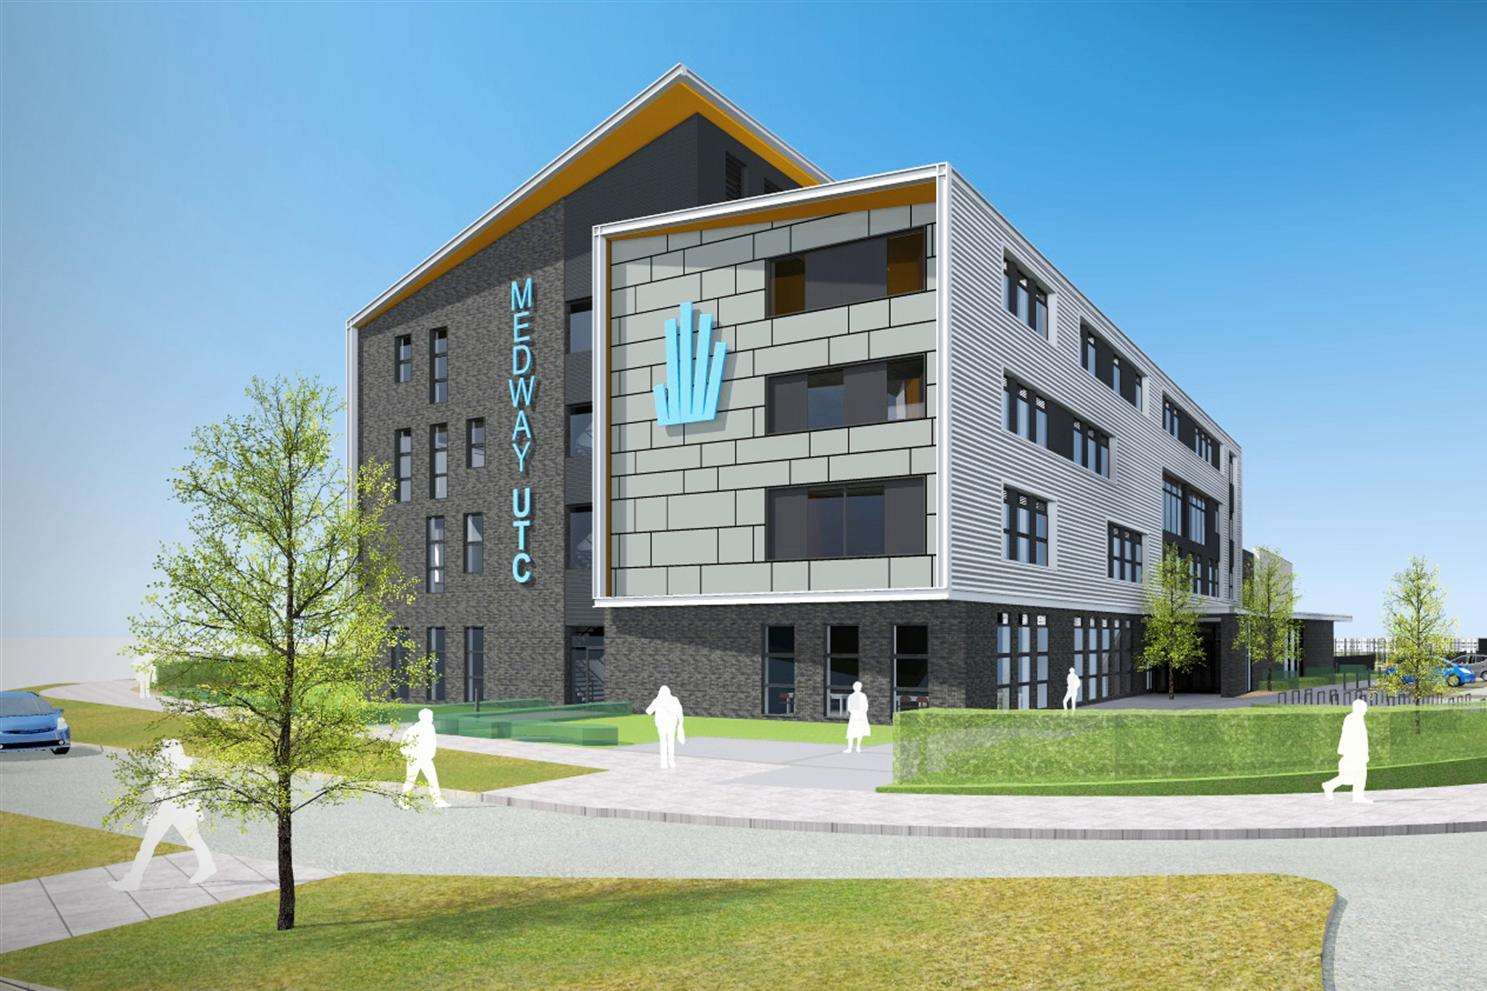 How Medway's UTC will look